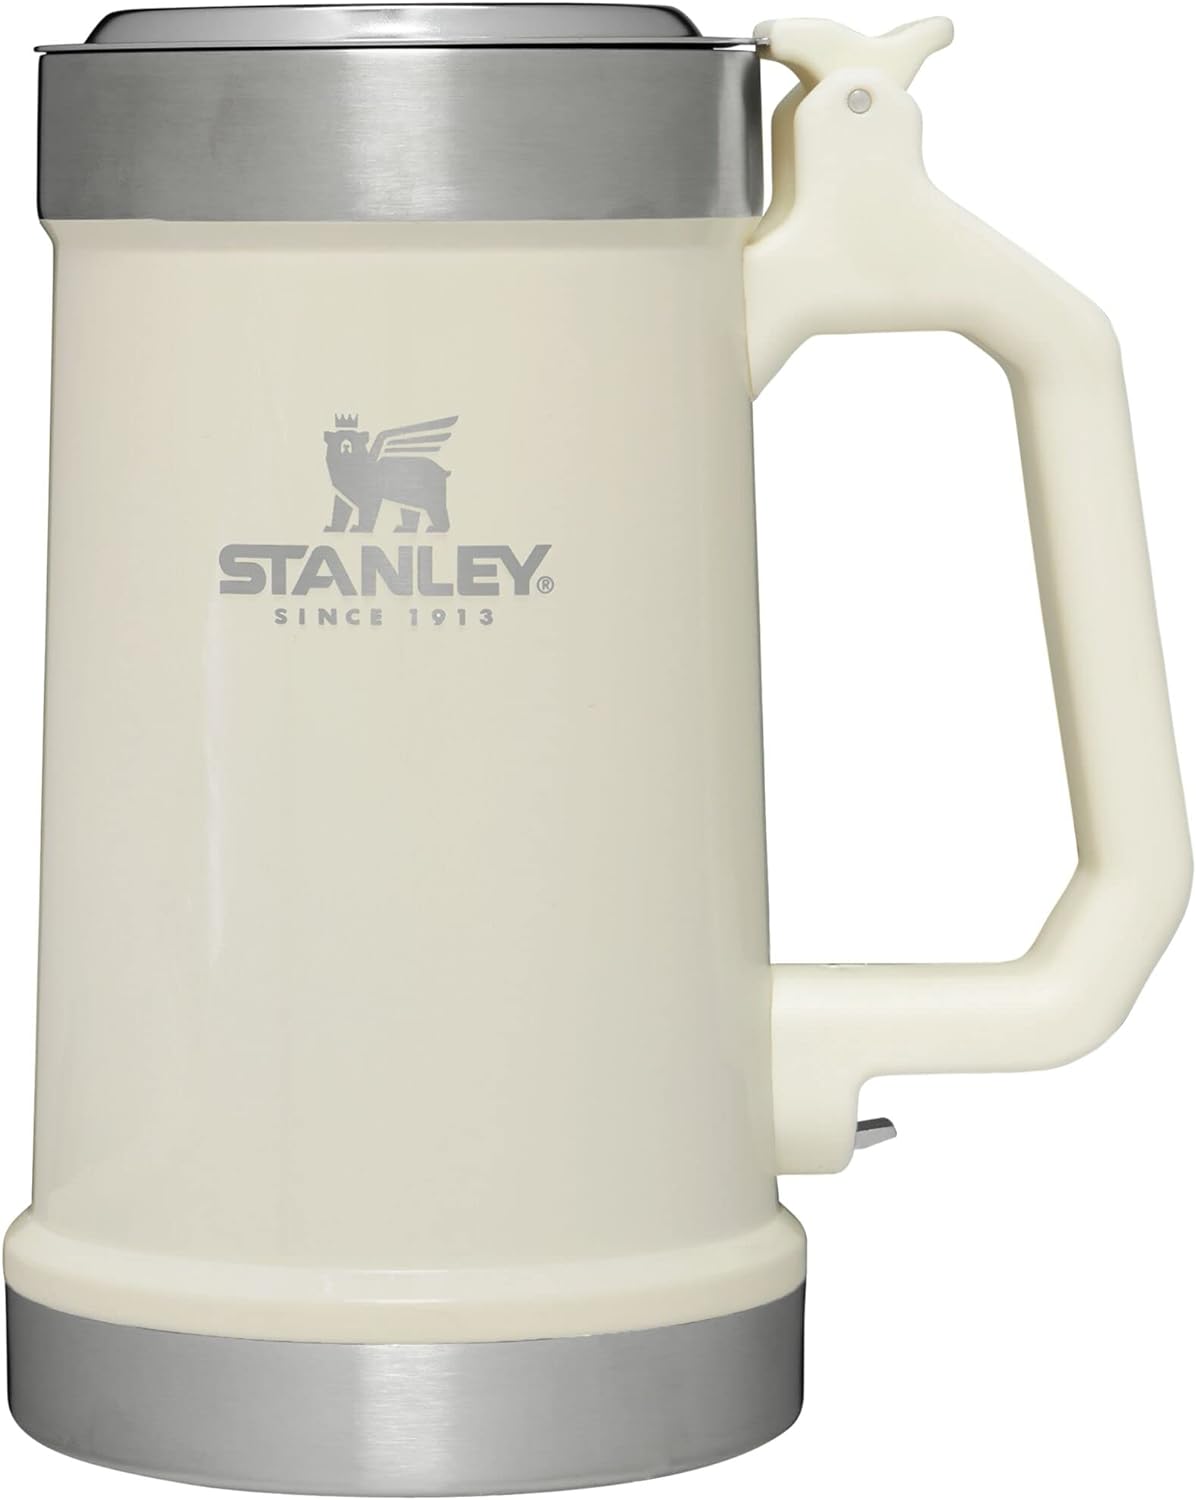 Stanley Beer Stein Review